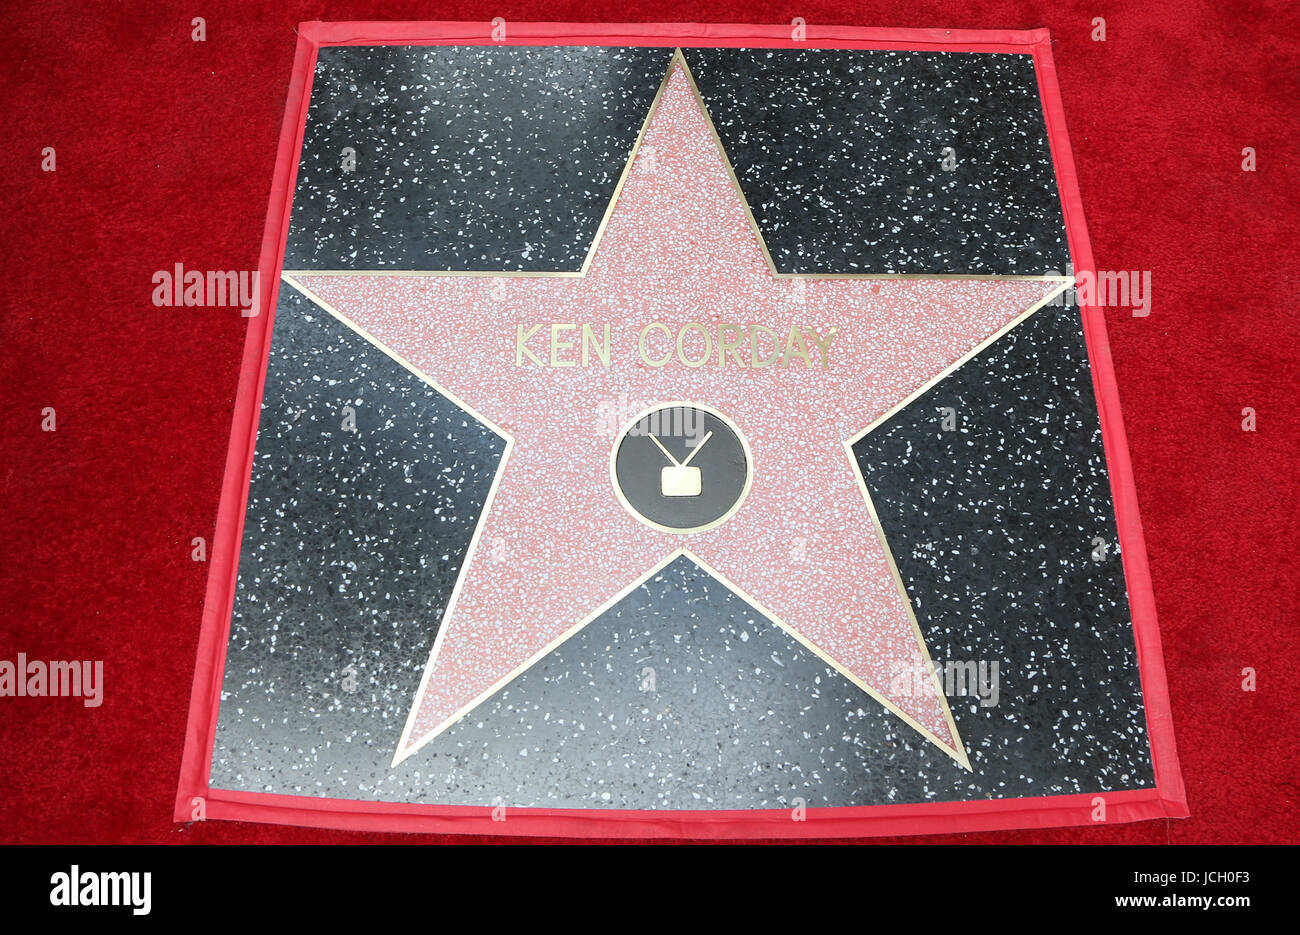 Television Producer Ken Corday Honored With Star On The Hollywood Walk Of Fame  Featuring: Atmosphere Where: Hollywood, California, United States When: 15 May 2017 Credit: FayesVision/WENN.com Stock Photo